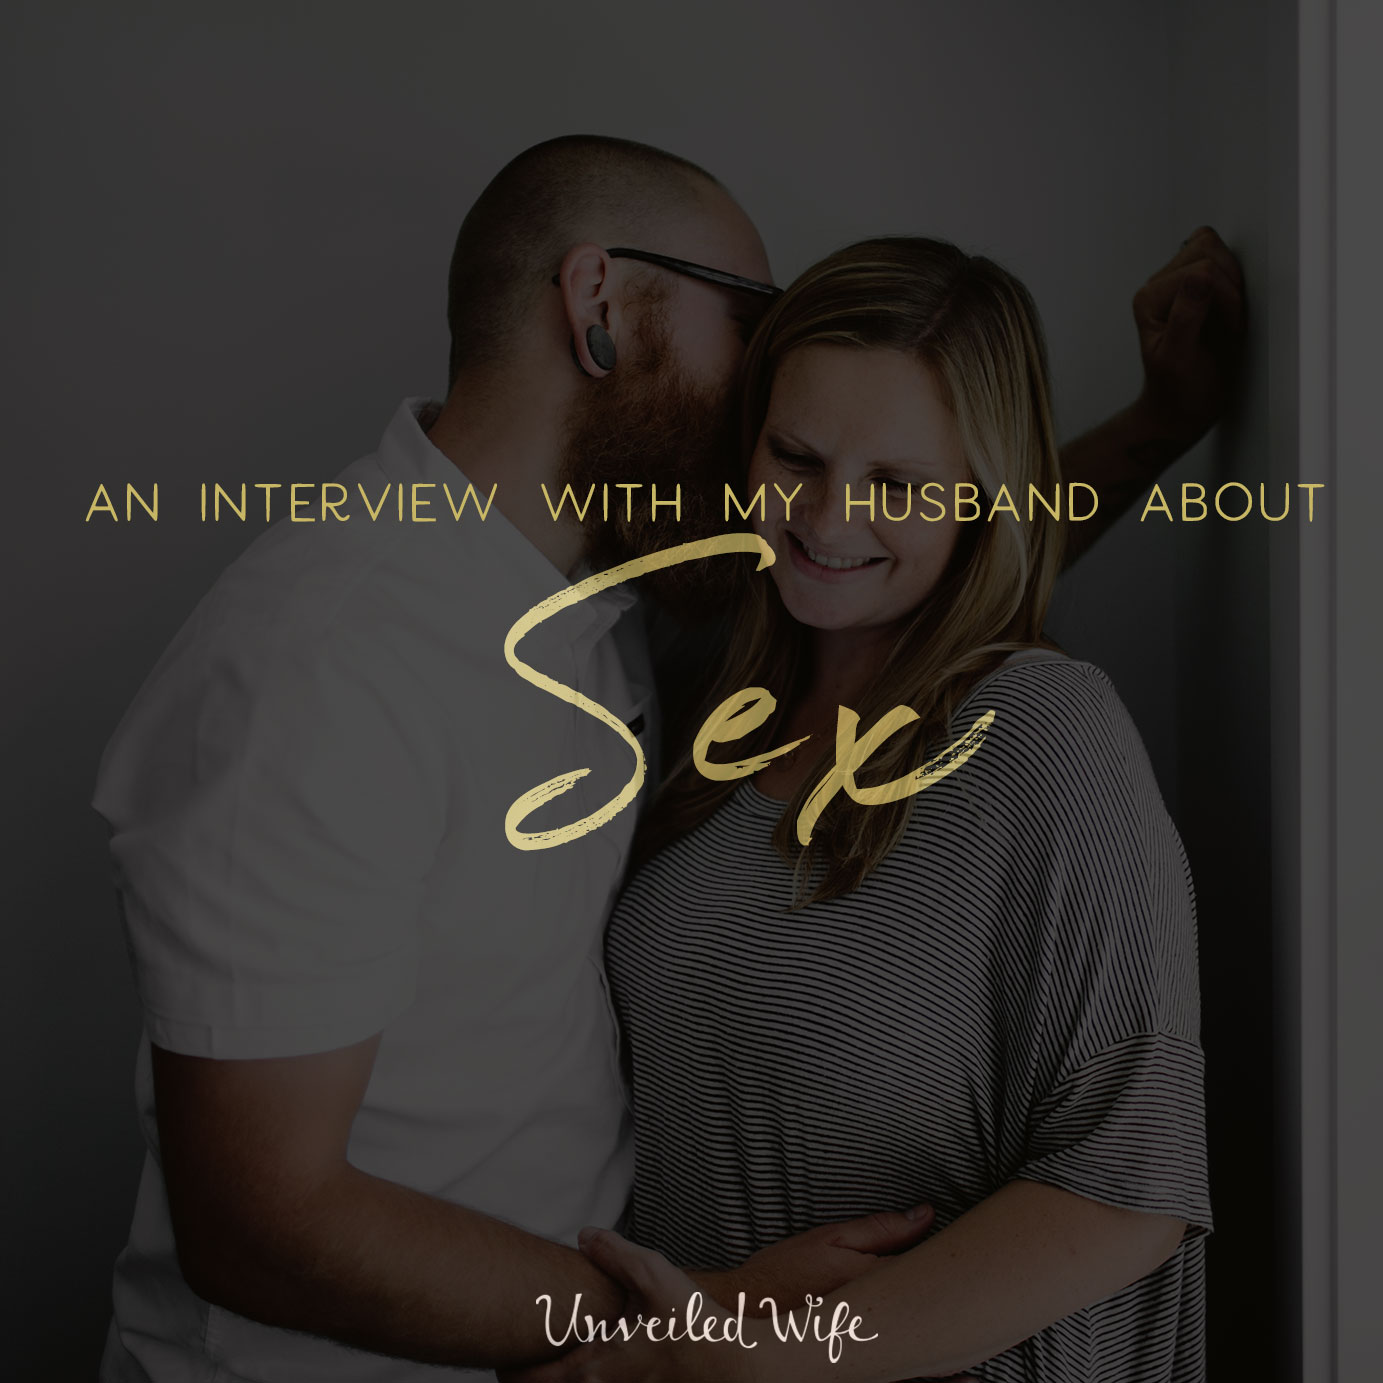 My Interview With My Husband About Sex!